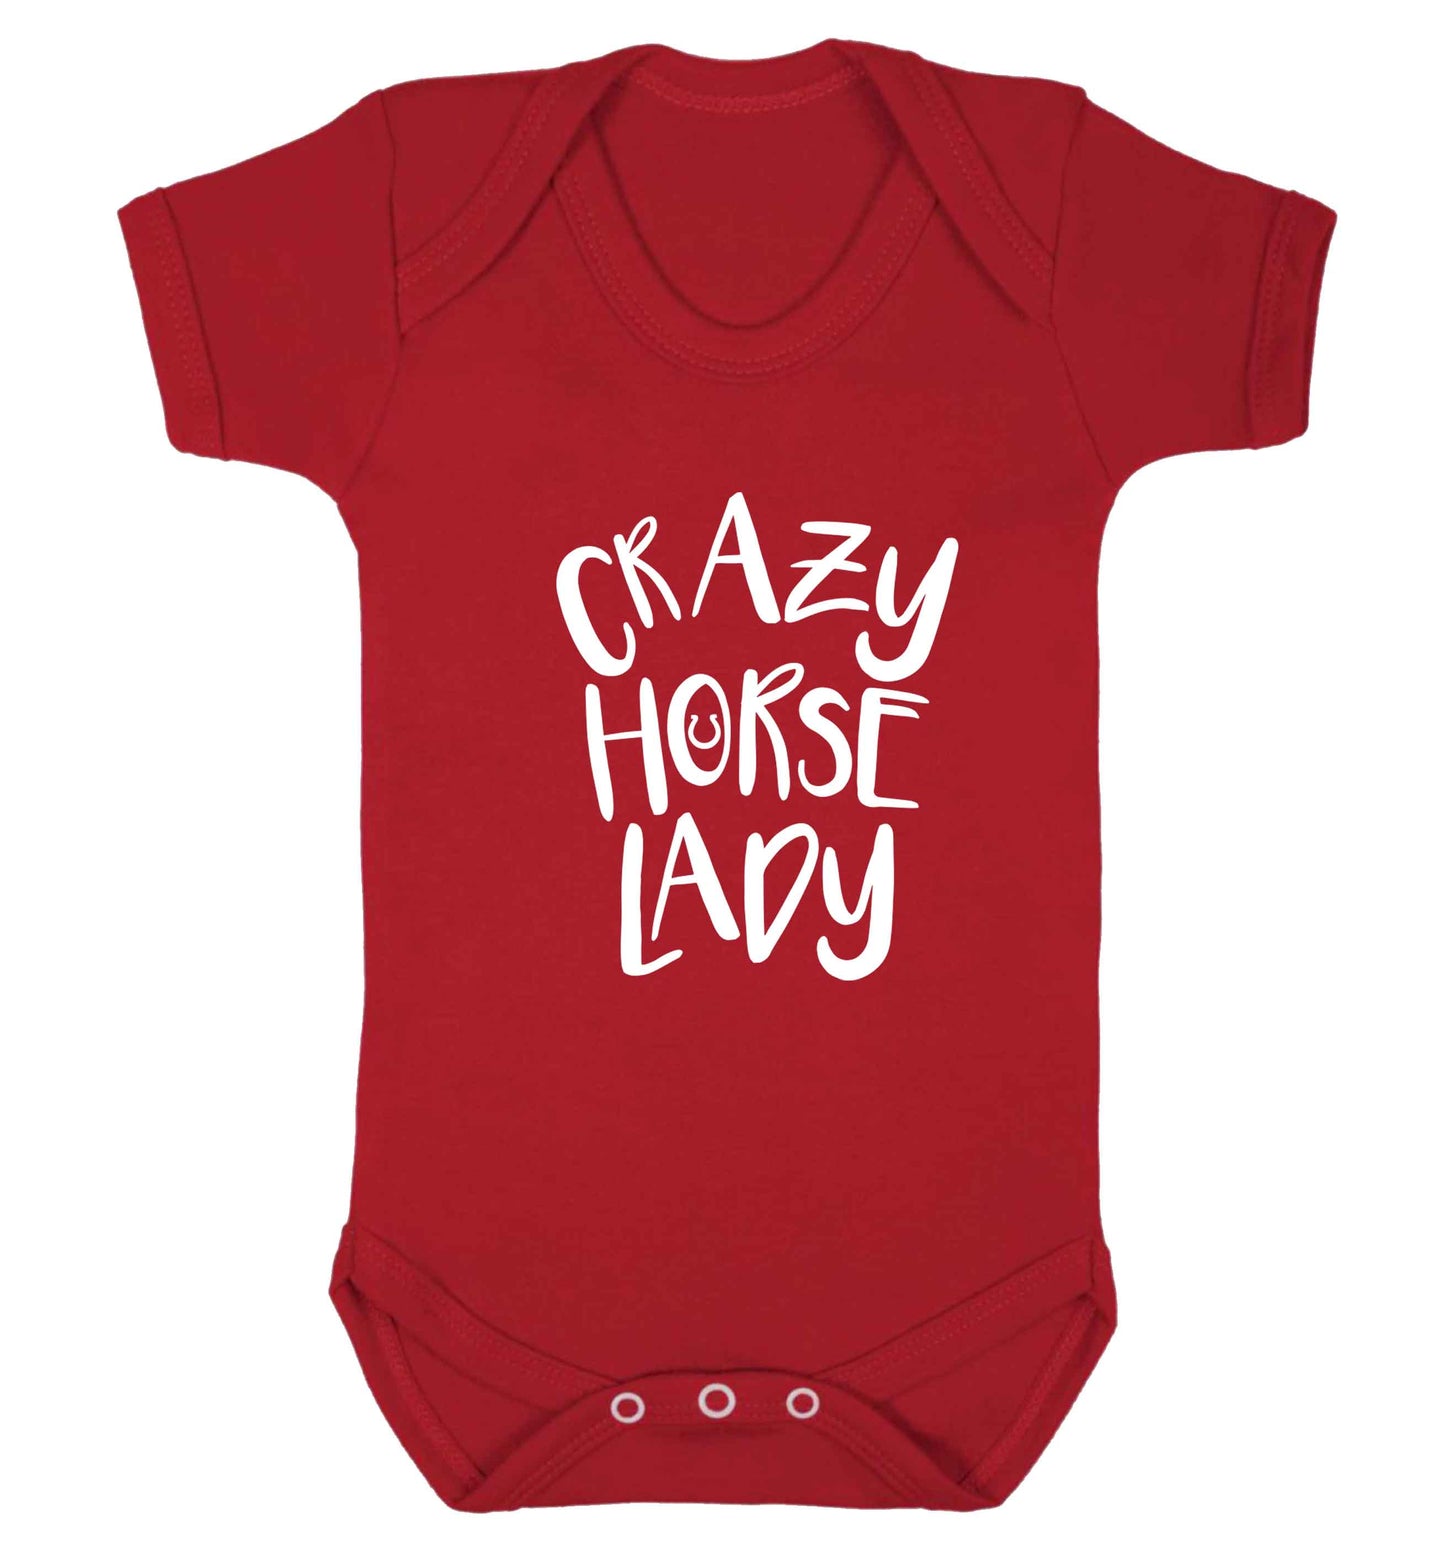 Crazy horse lady baby vest red 18-24 months